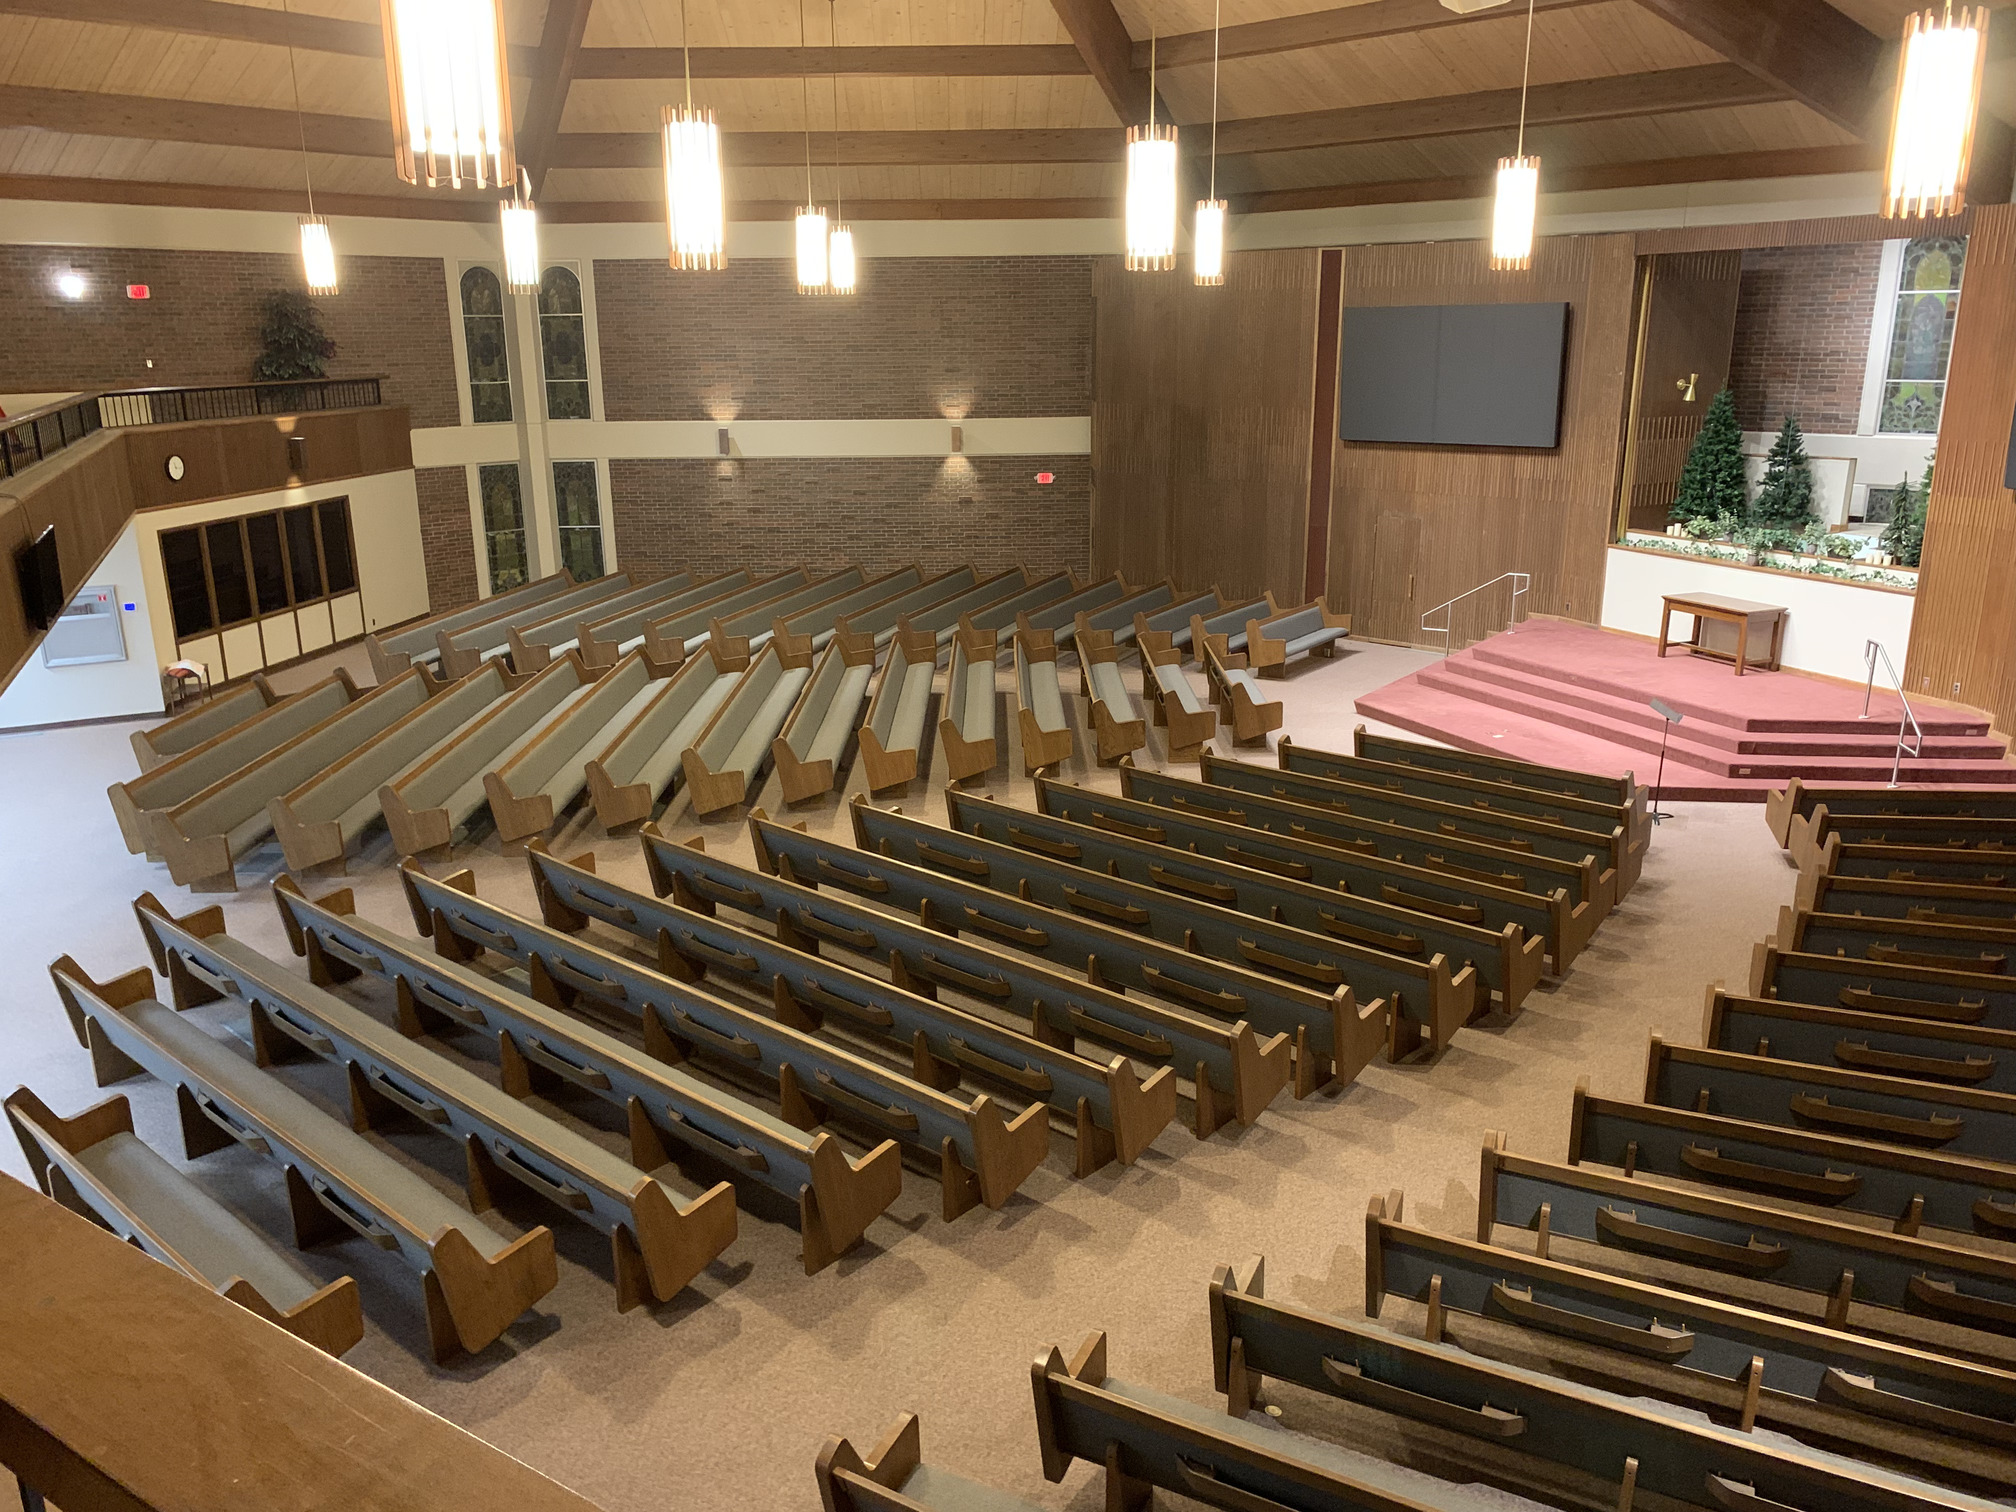 Right Aerial view of church pew upholstery Wichita Kansas performed by Woods Church Interiors nationwide pew upholstery service